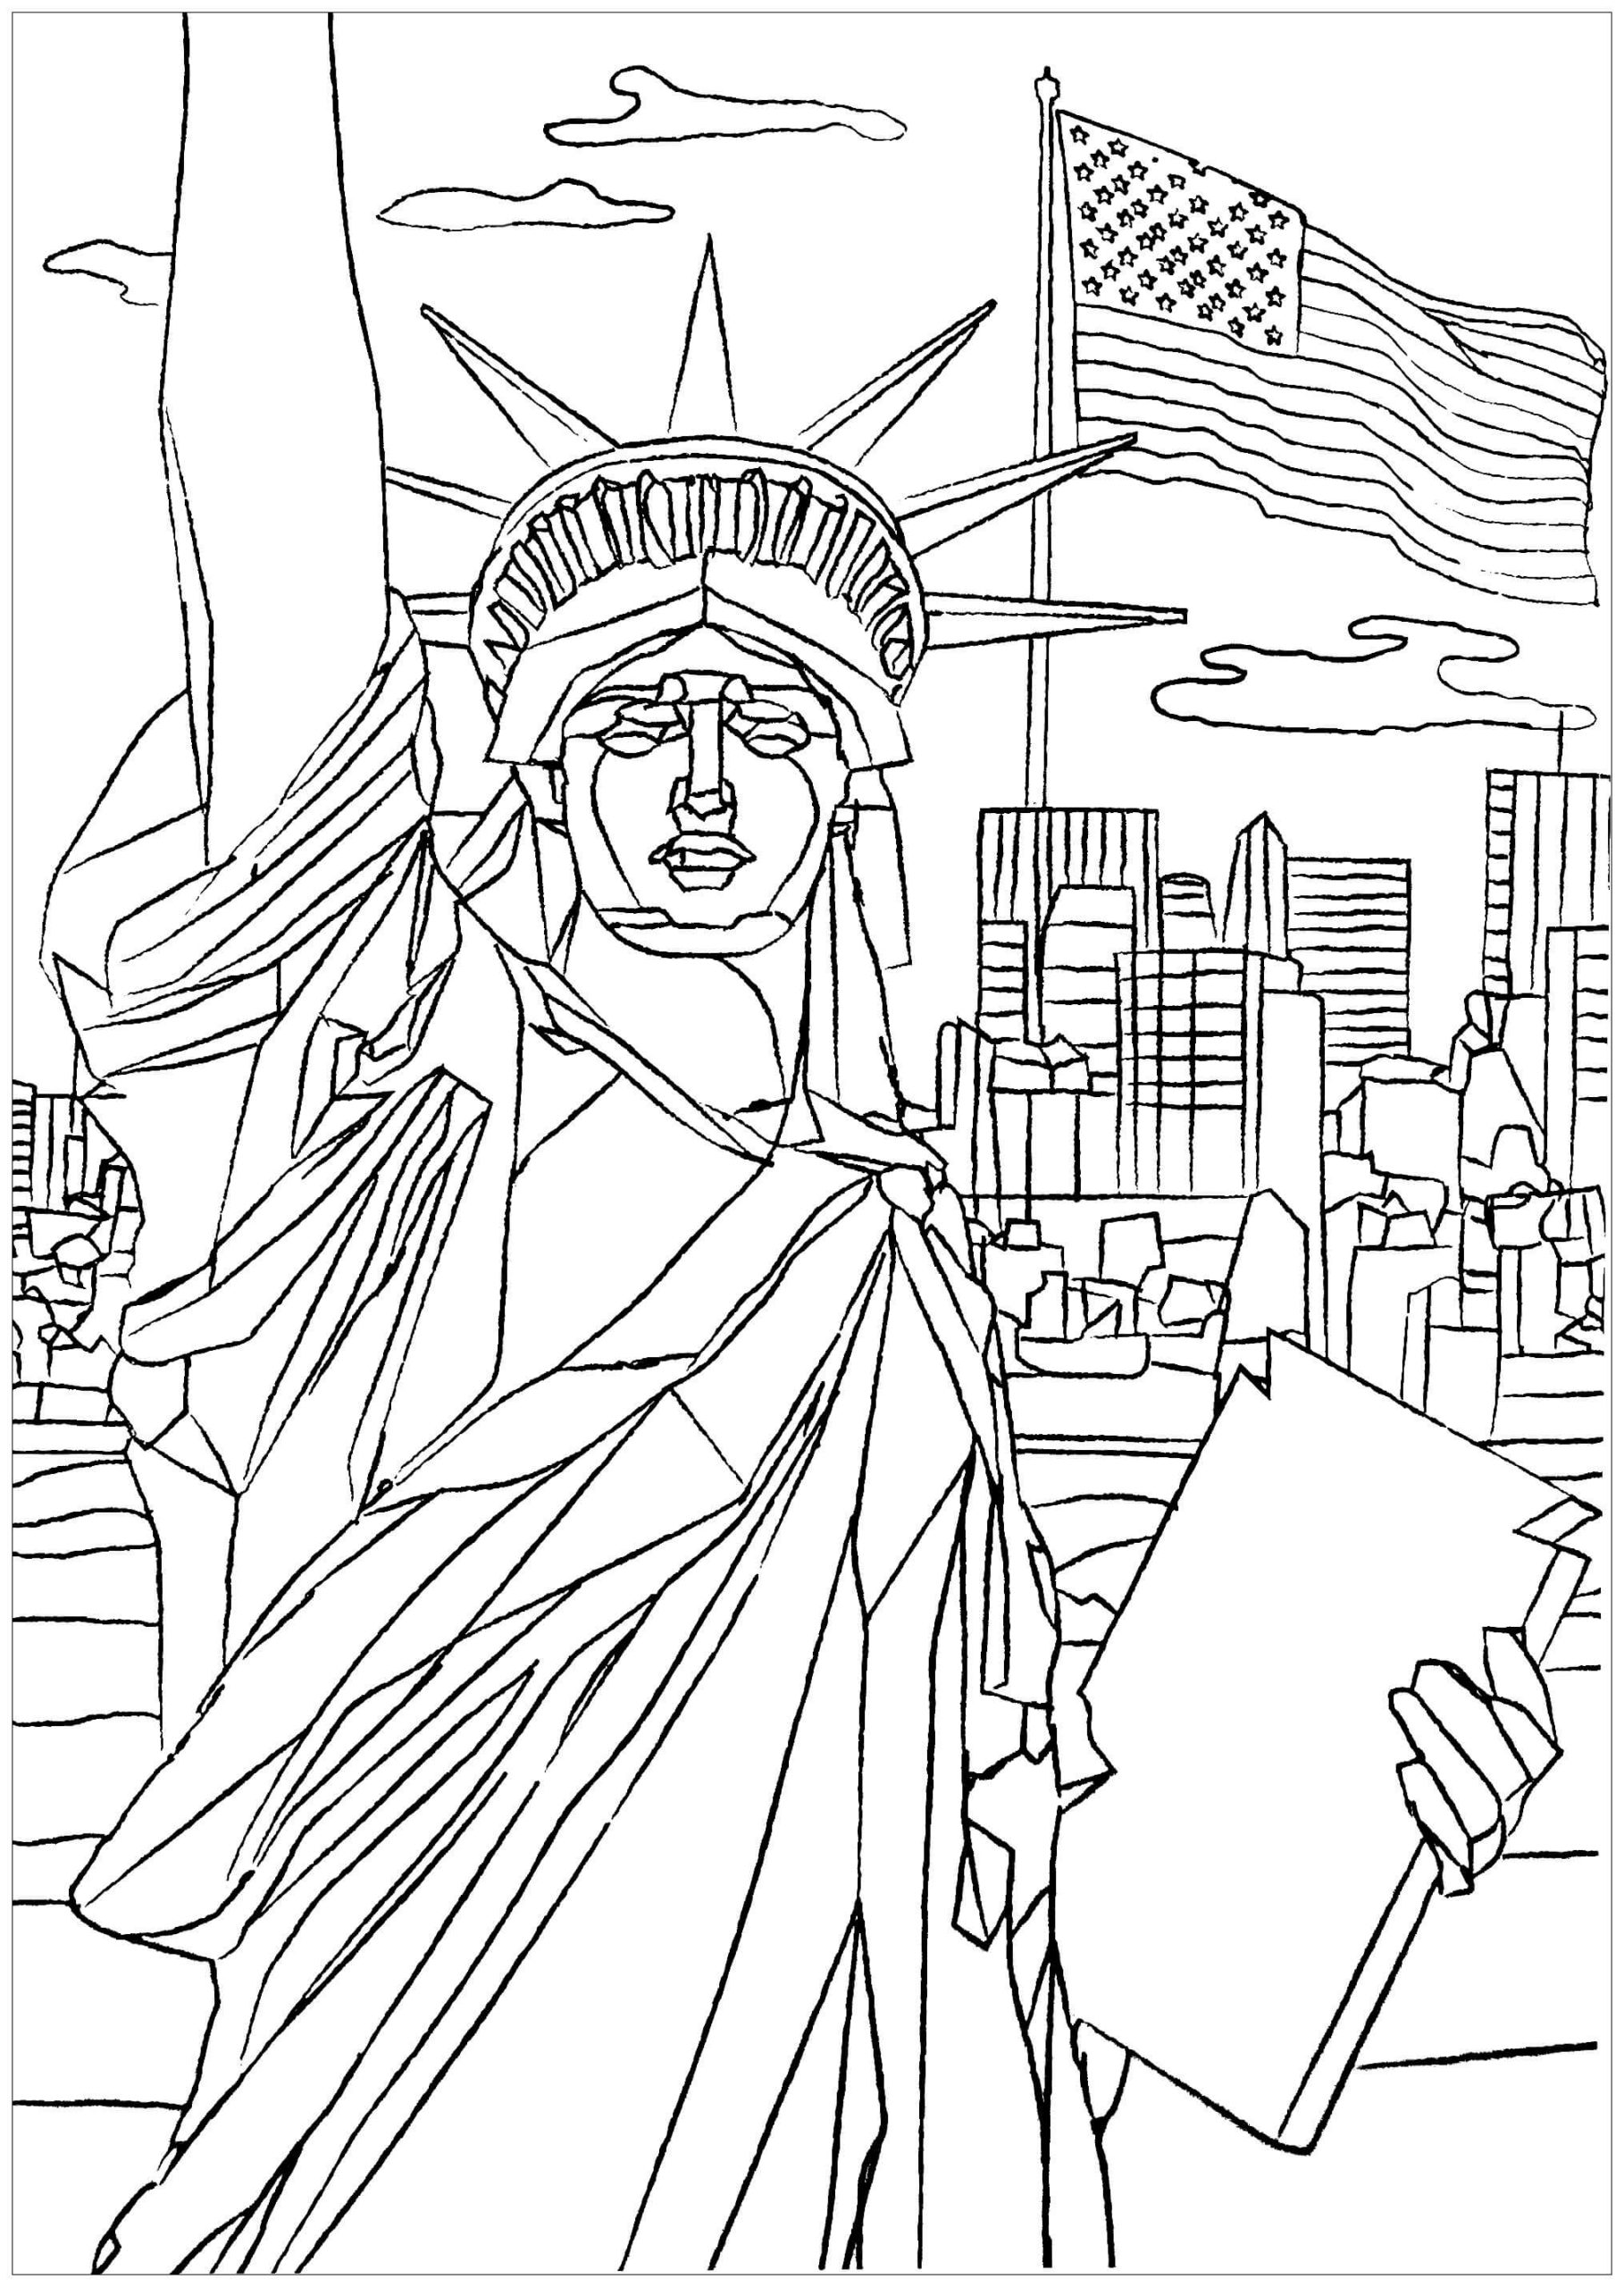 fireworks coloring pages 4th july | 4th july coloring pages | 4th of july sunday school coloring pages